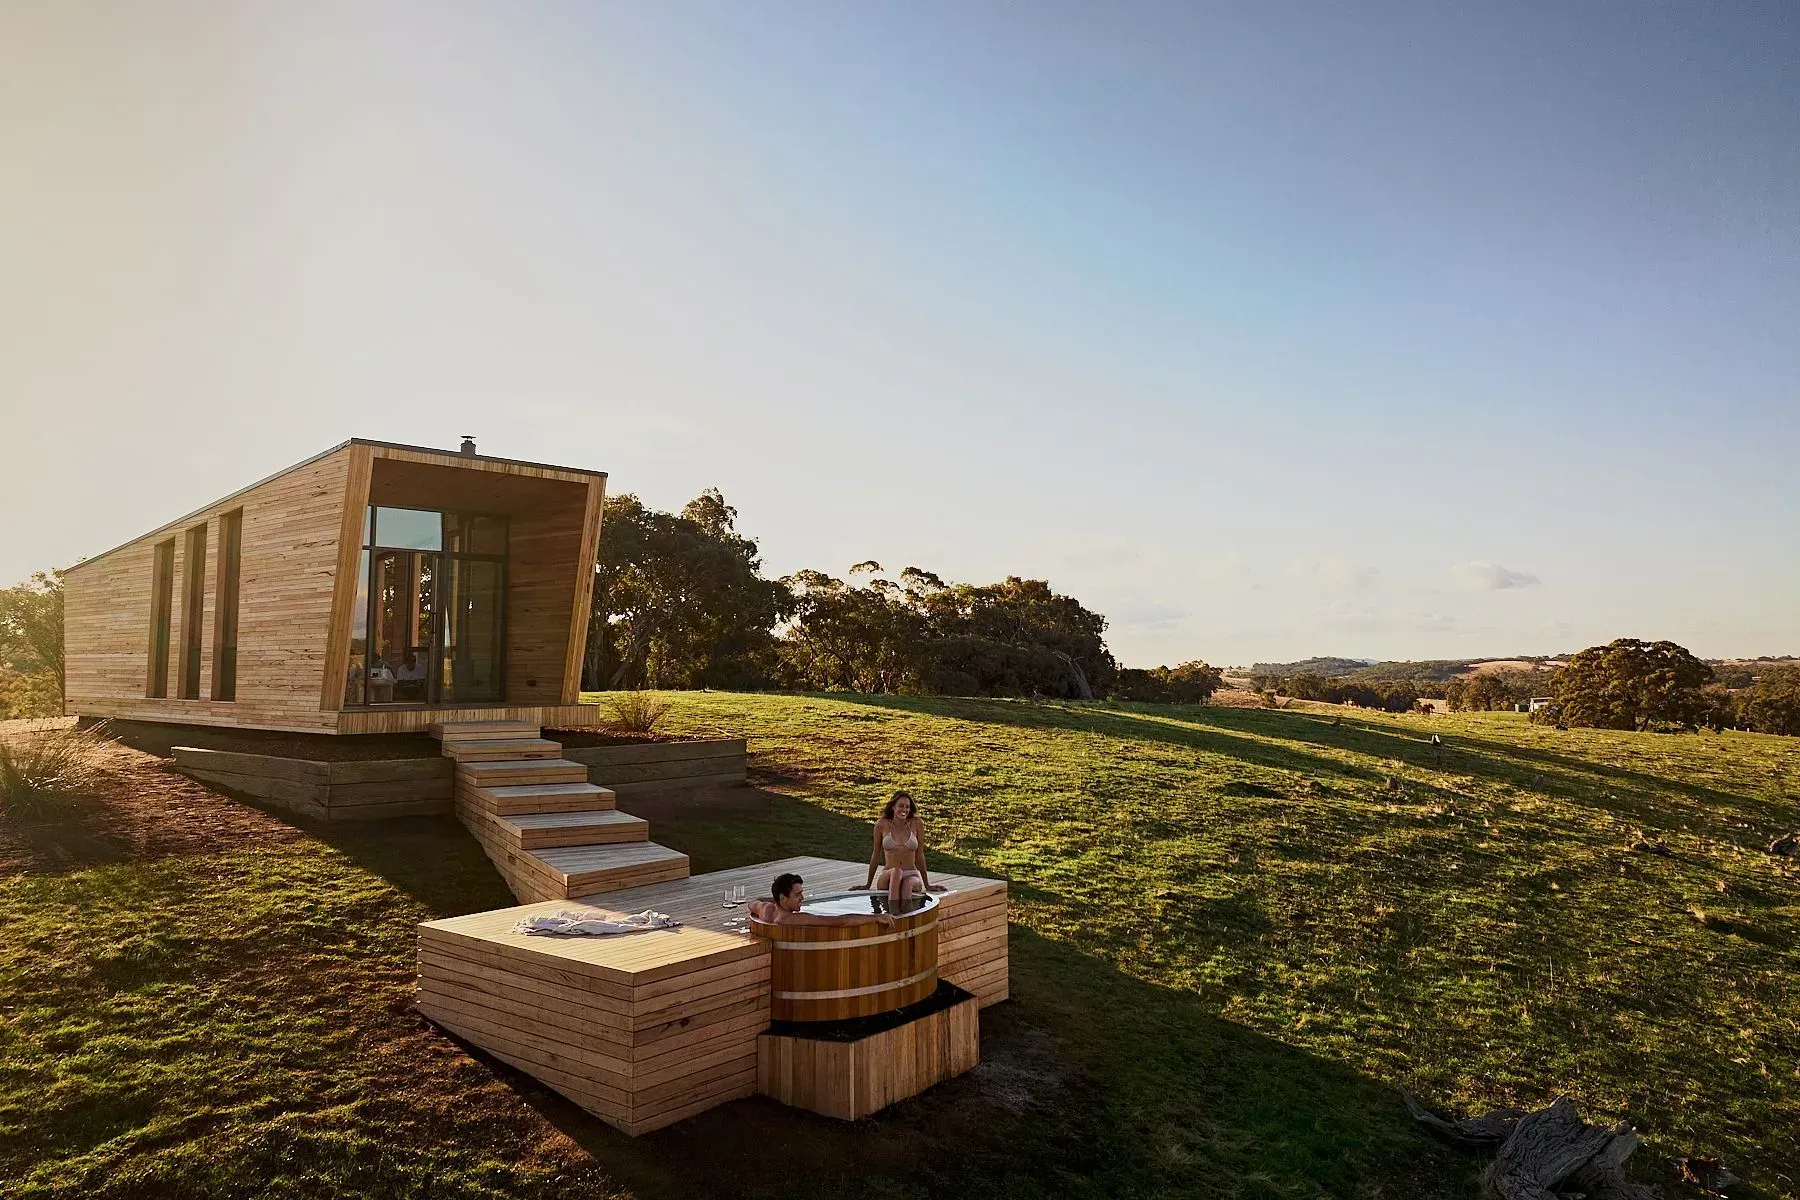 Heathcote by Wilka Eco Escapes showing the timber cabin sitting in the landscape with two people in the timber spa bath